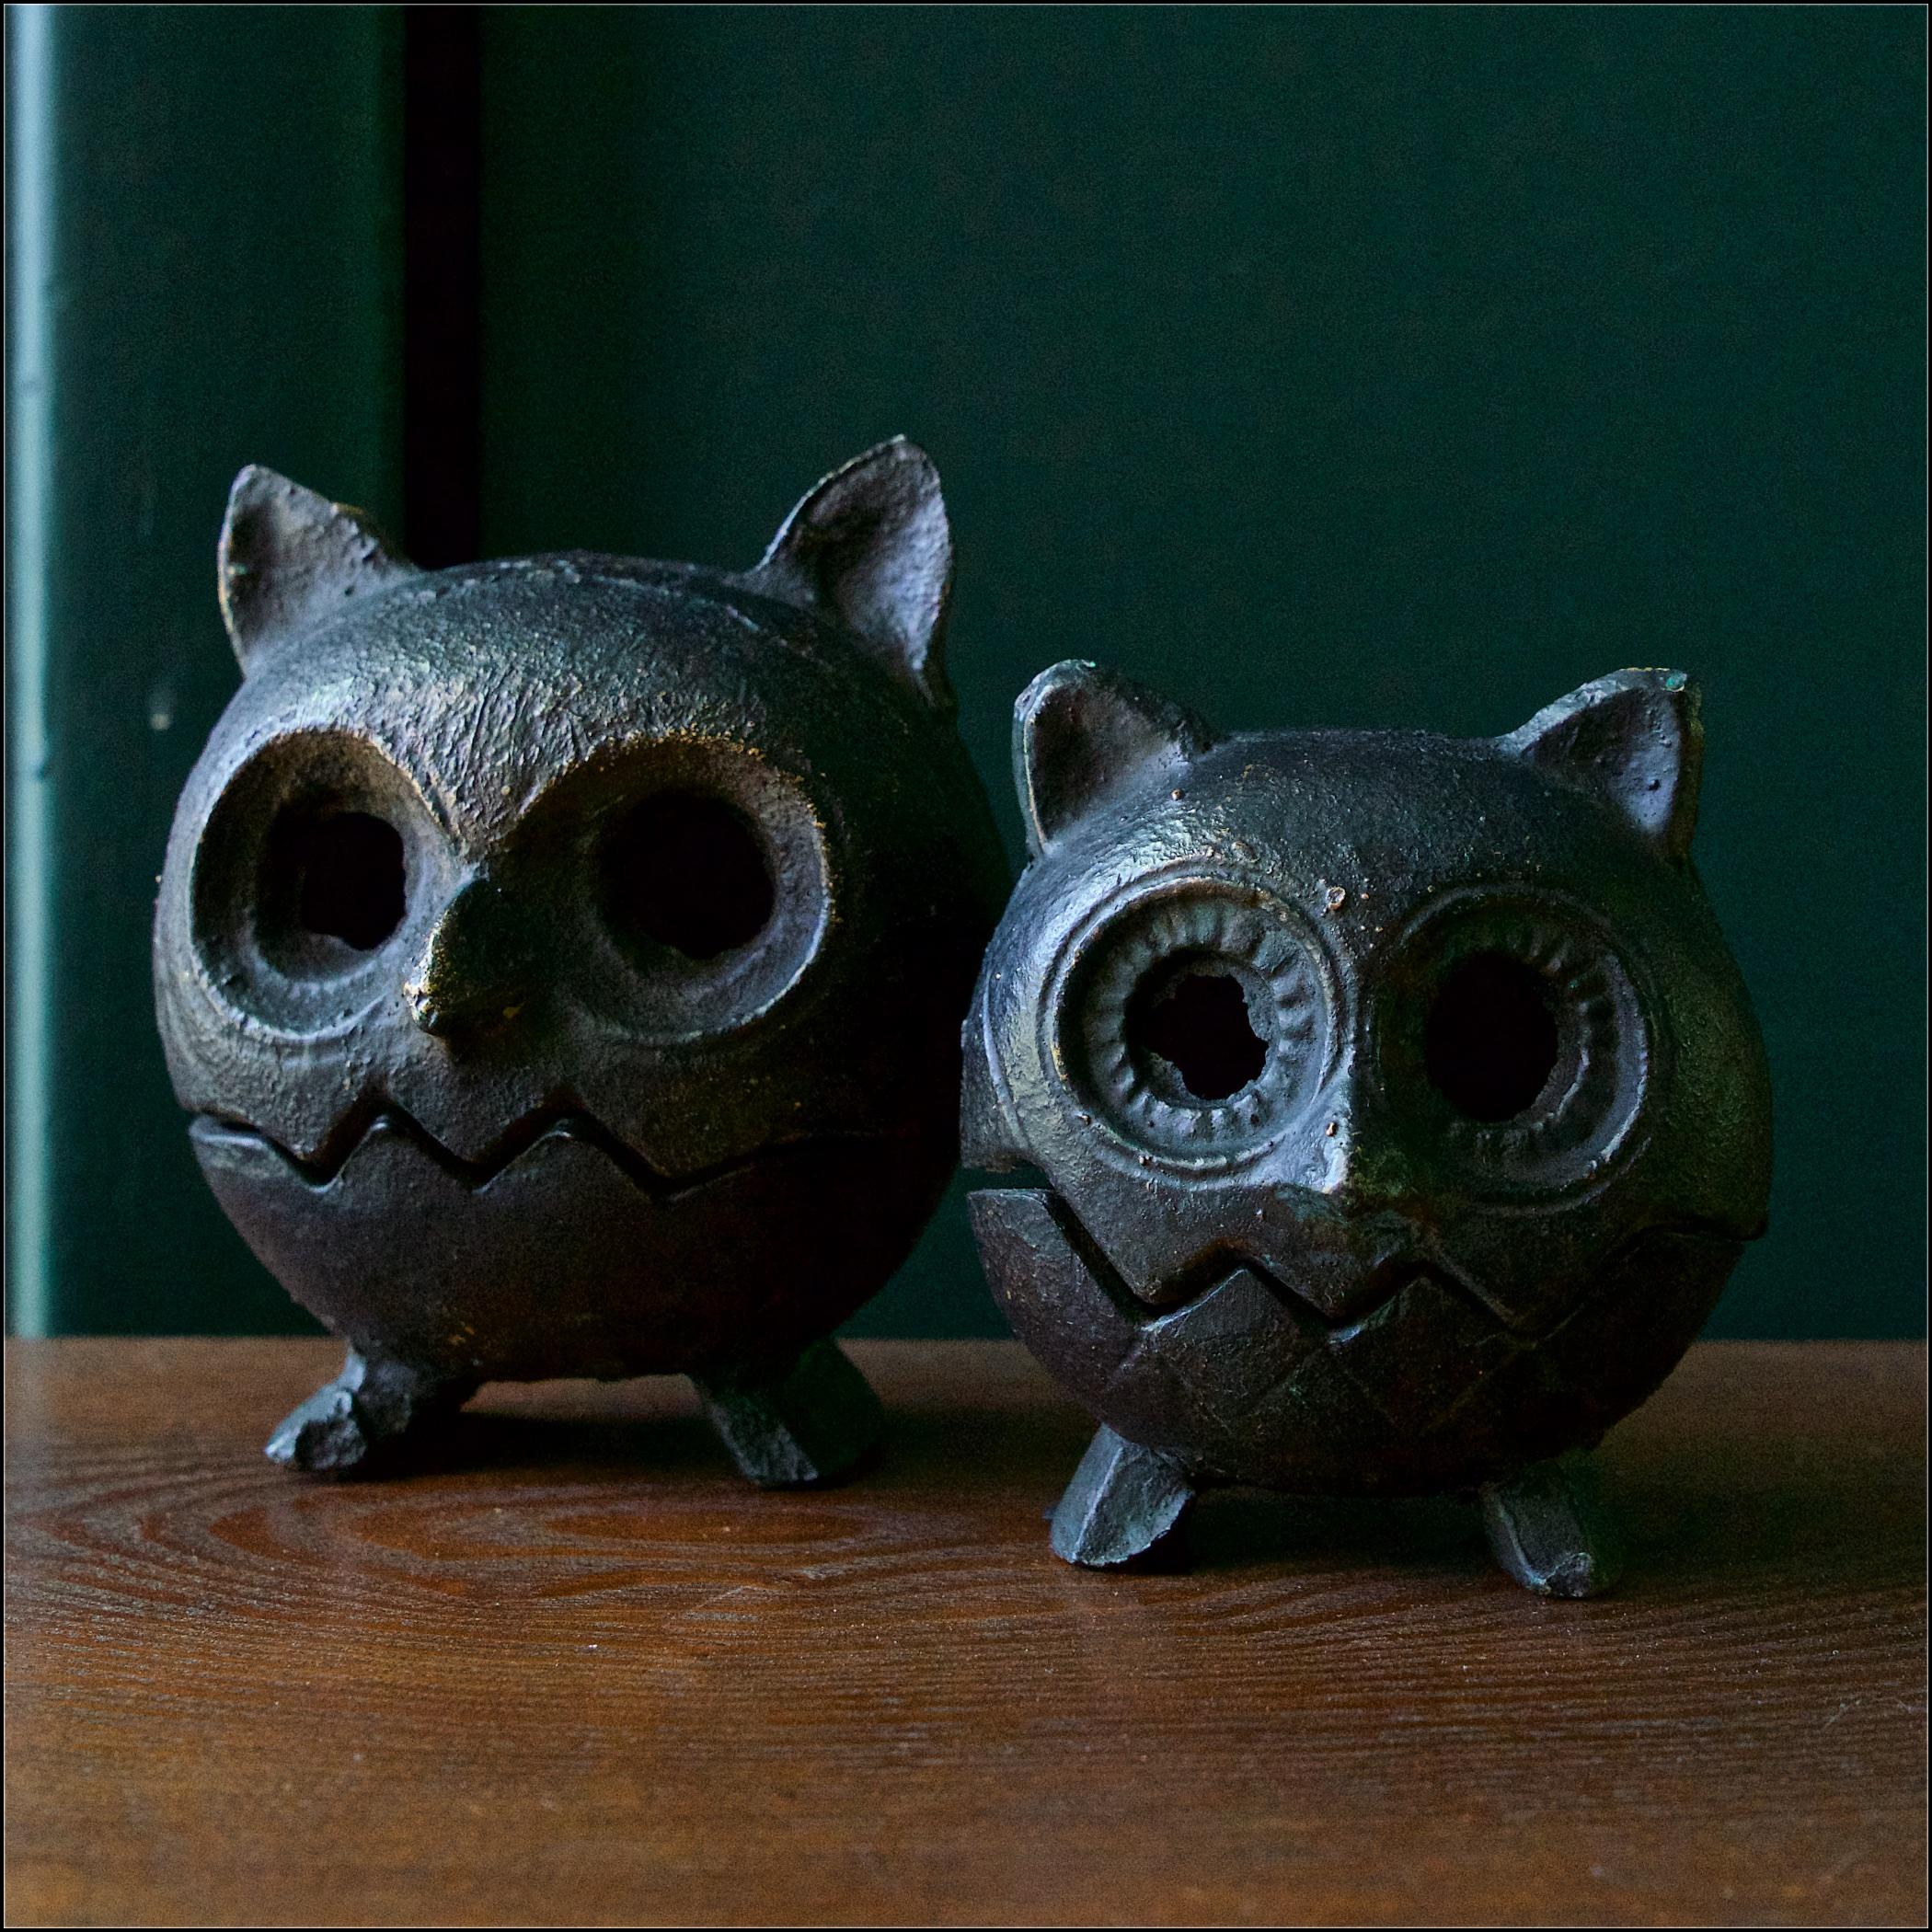 Pair of rough cast Owl bird forms. Each 2-piece. For incense or candleholder, or table lanterns. No damage, just roughness from manufacturing.

Measures: Small owl W: 3.5 x D: 3 x H: 4 in.
Large owl W: 5 x D: 4 x H: 3.5 in.